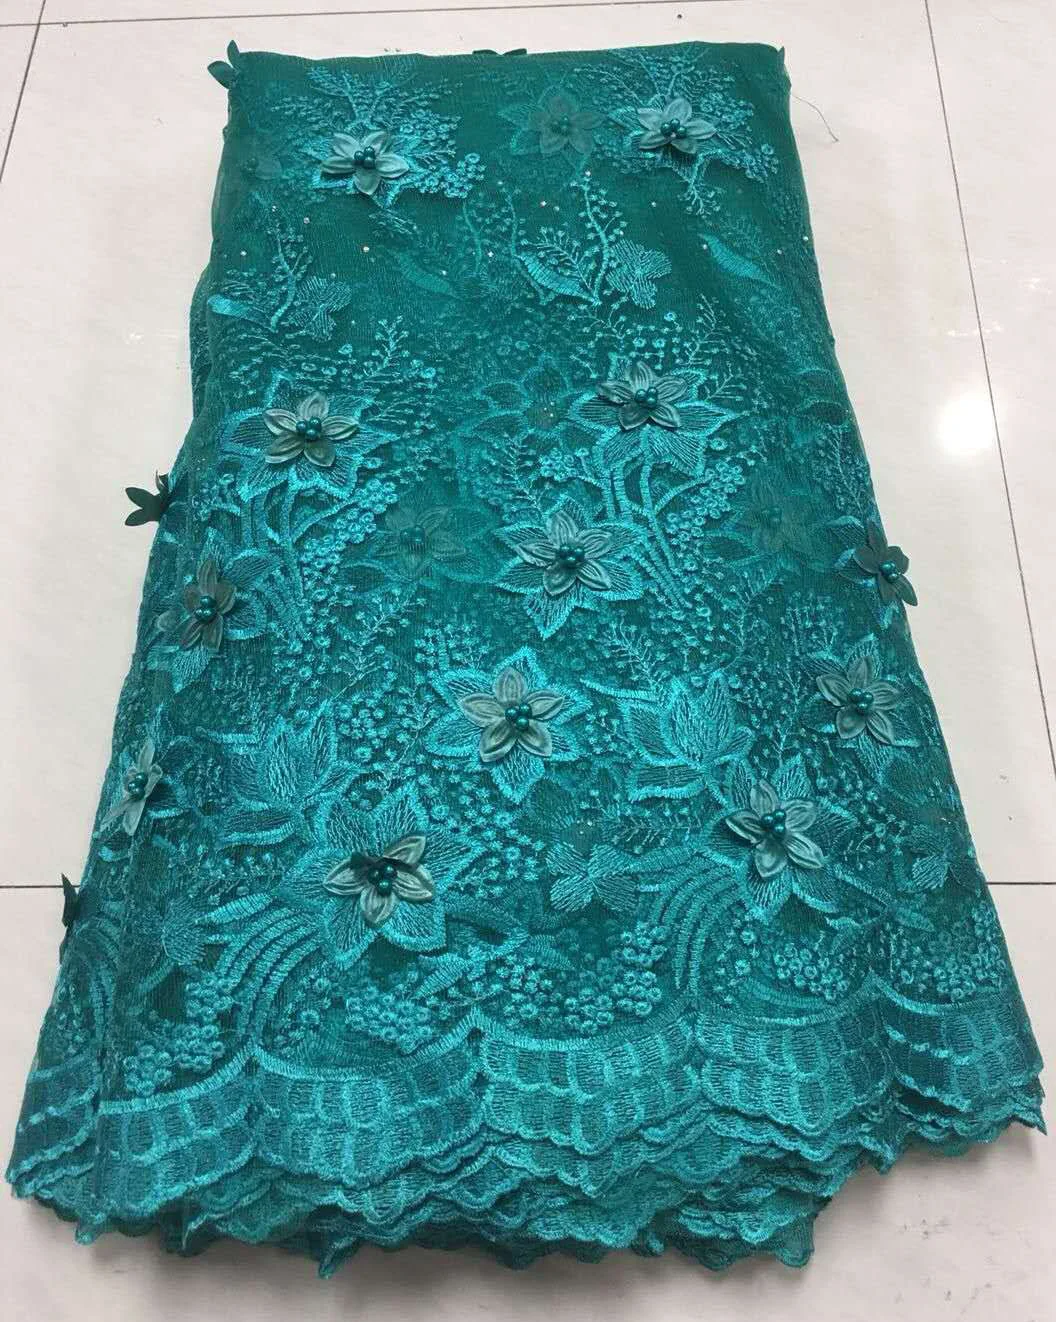 Teal Lace Fabric 2019 High Quality Lace Nigerian Lace Fabric for Women ...